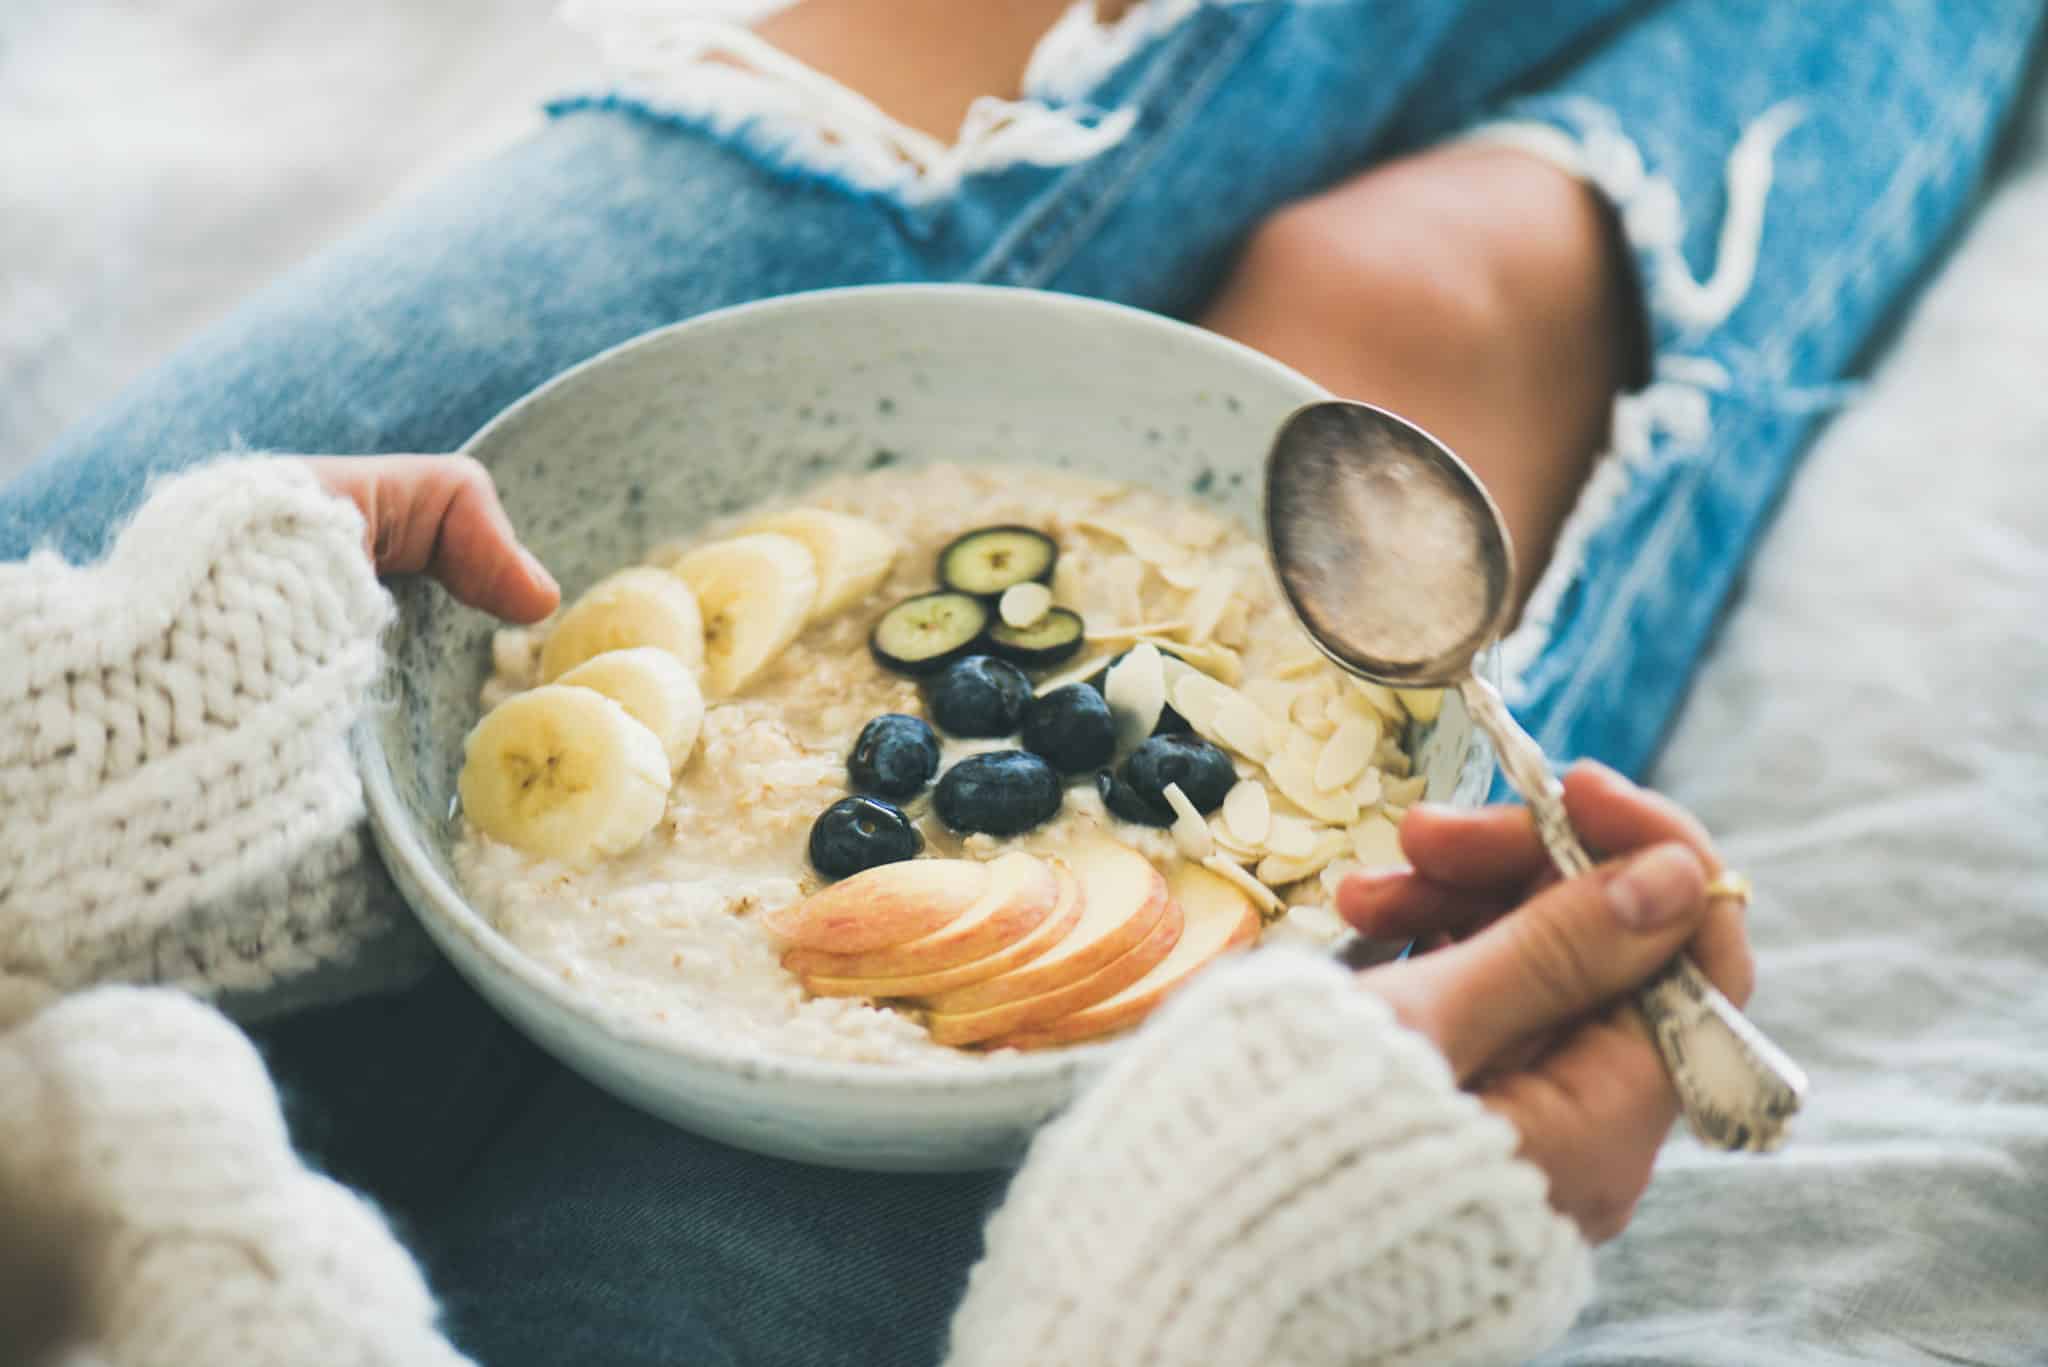 Woman in woolen sweater and shabby jeans eating vegan almond milk oatmeal in bowl with berries, fruit and almonds.